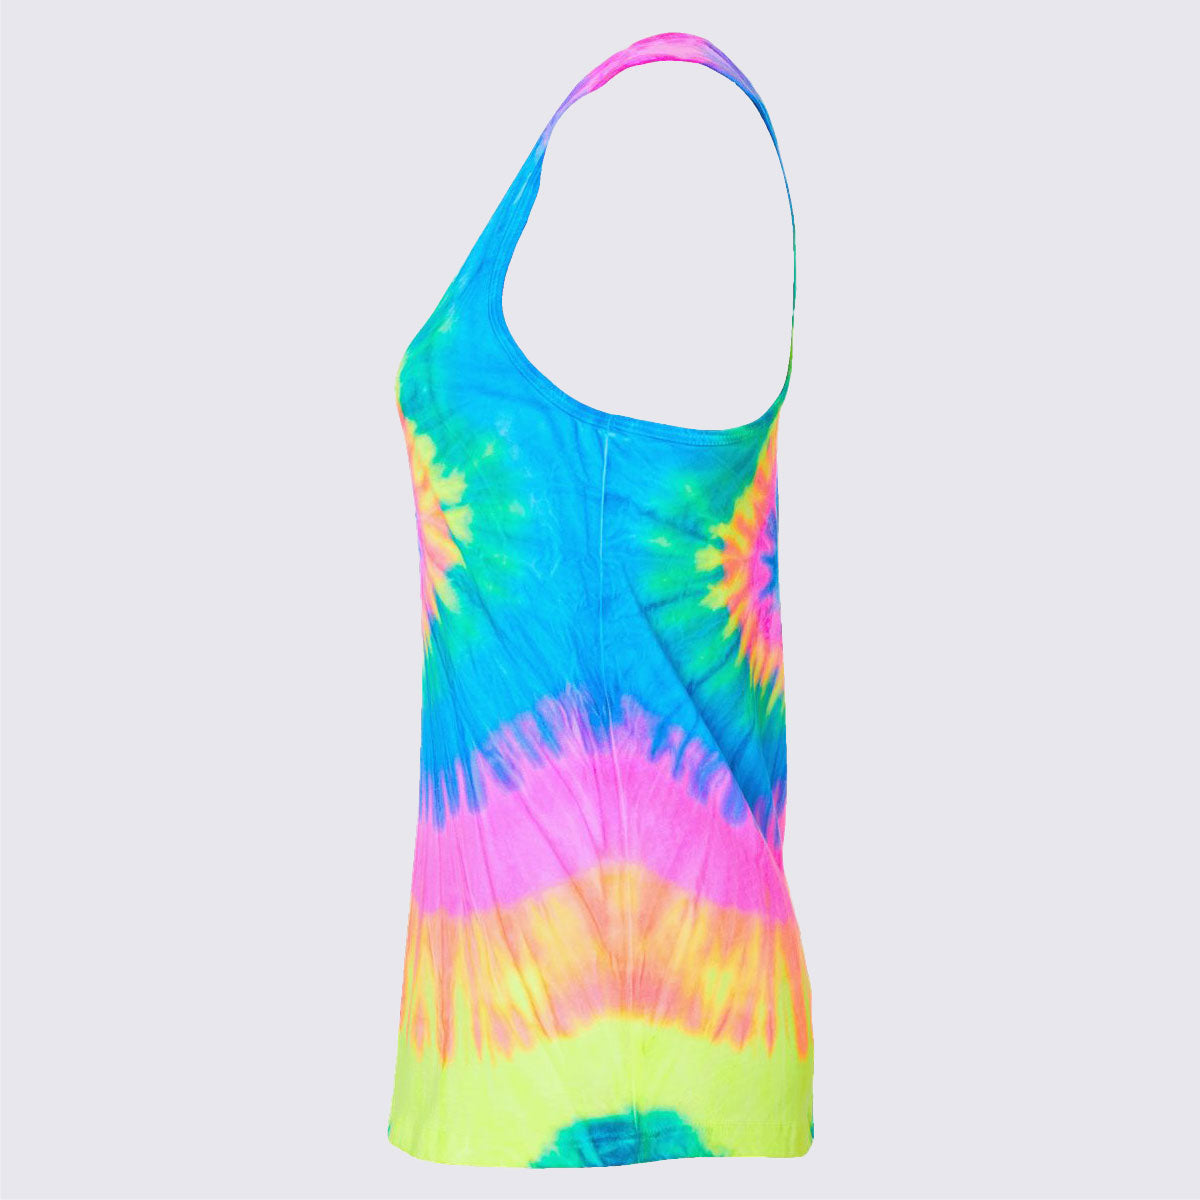 Girls Who Eat Tie-Dyed Racerback Tank Top